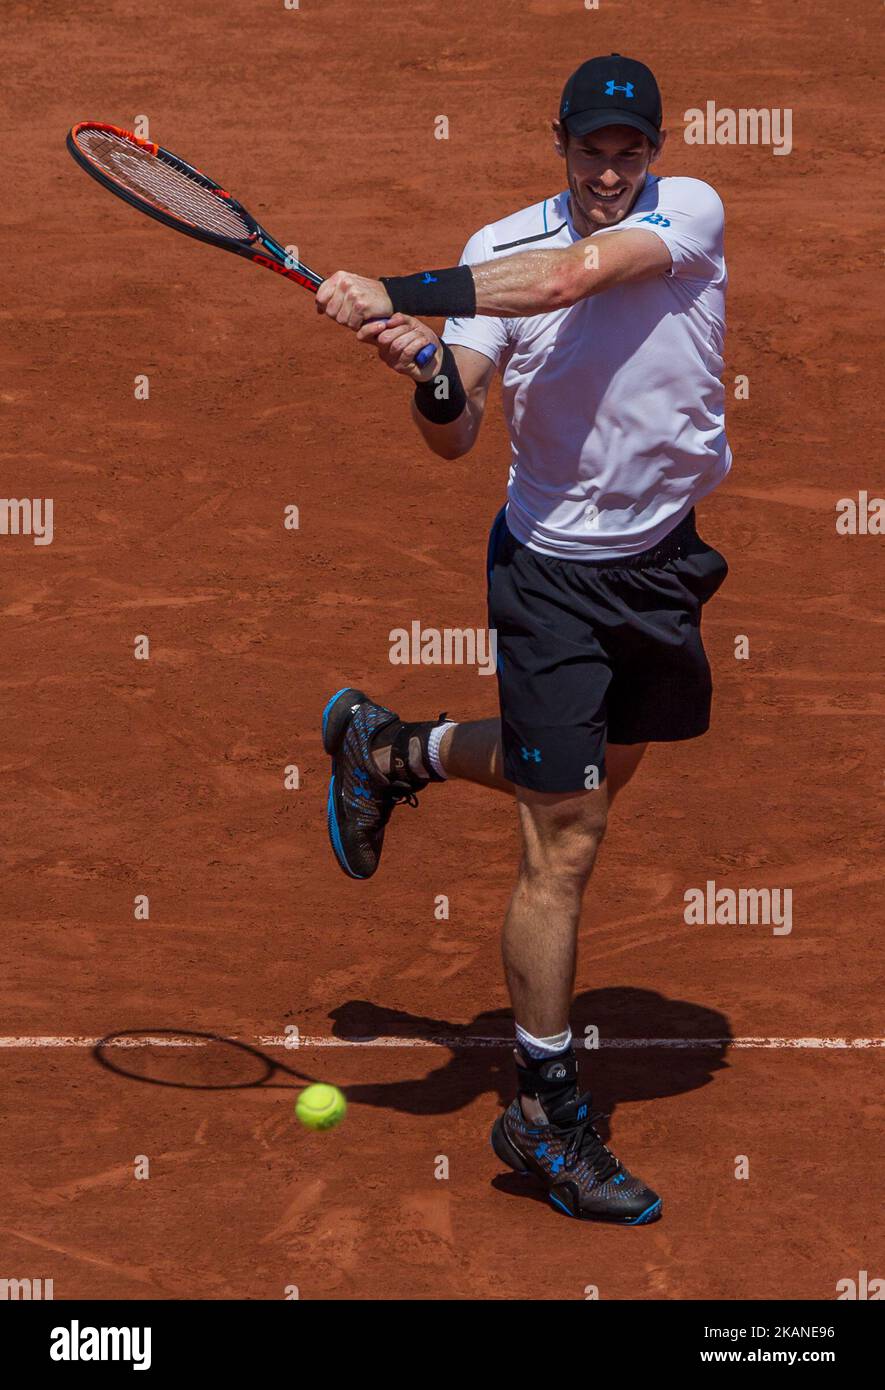 Andy Murray of Great Britain returns the ball to Martin Klizan of Slovakia  during the second round at Roland Garros Grand Slam Tournament - Day 5 on  June 1, 2017 in Paris,